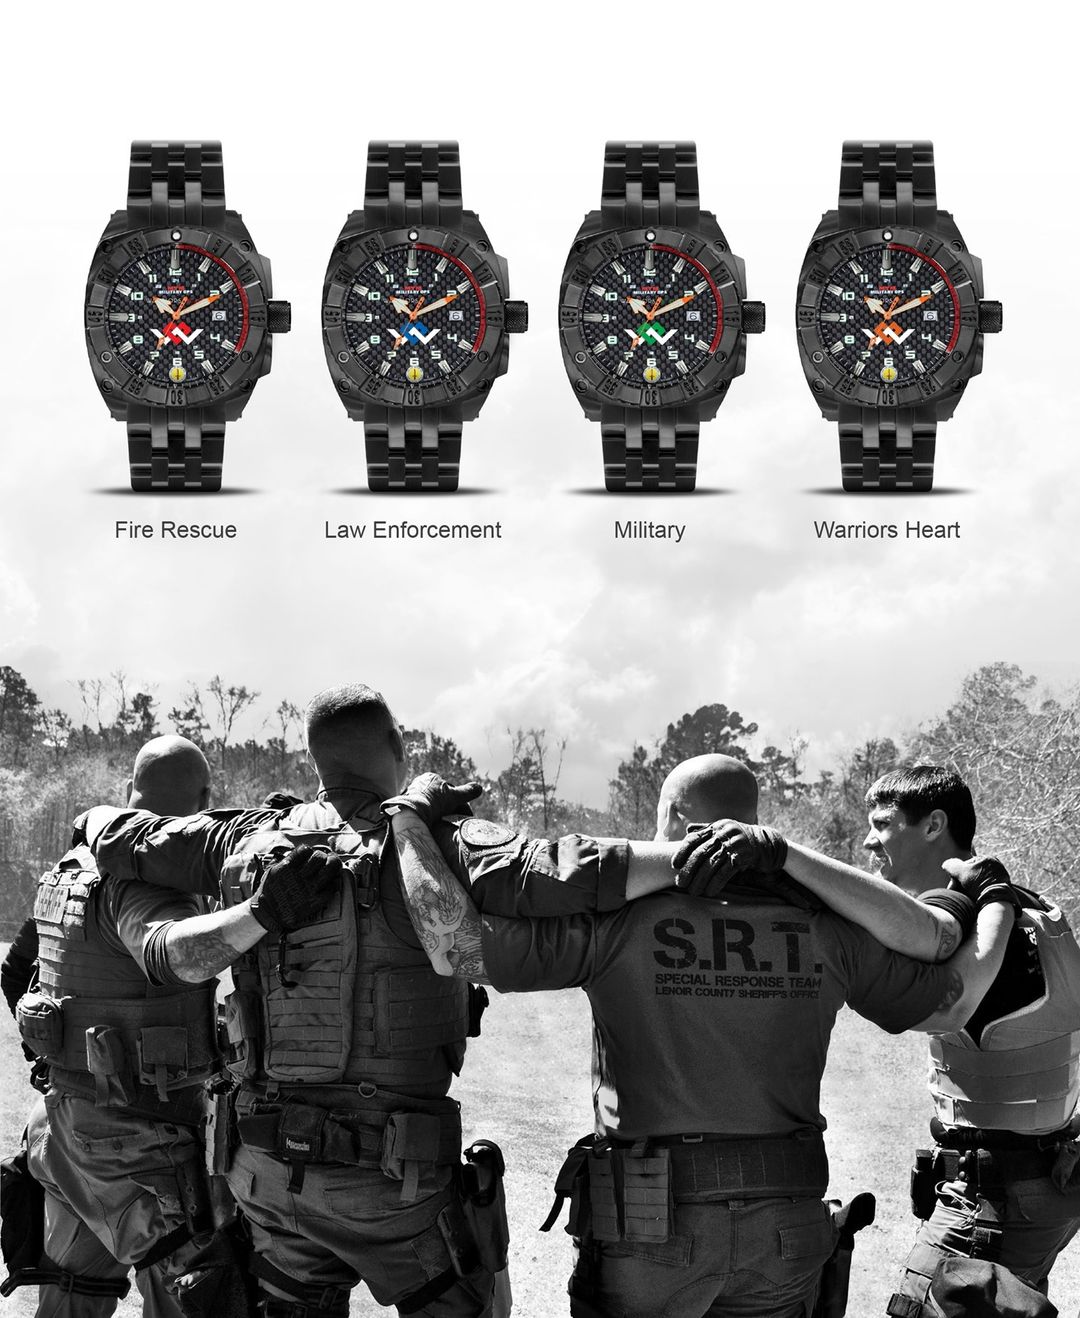 Warriors Heart Announces Collaboration with MTM Watch